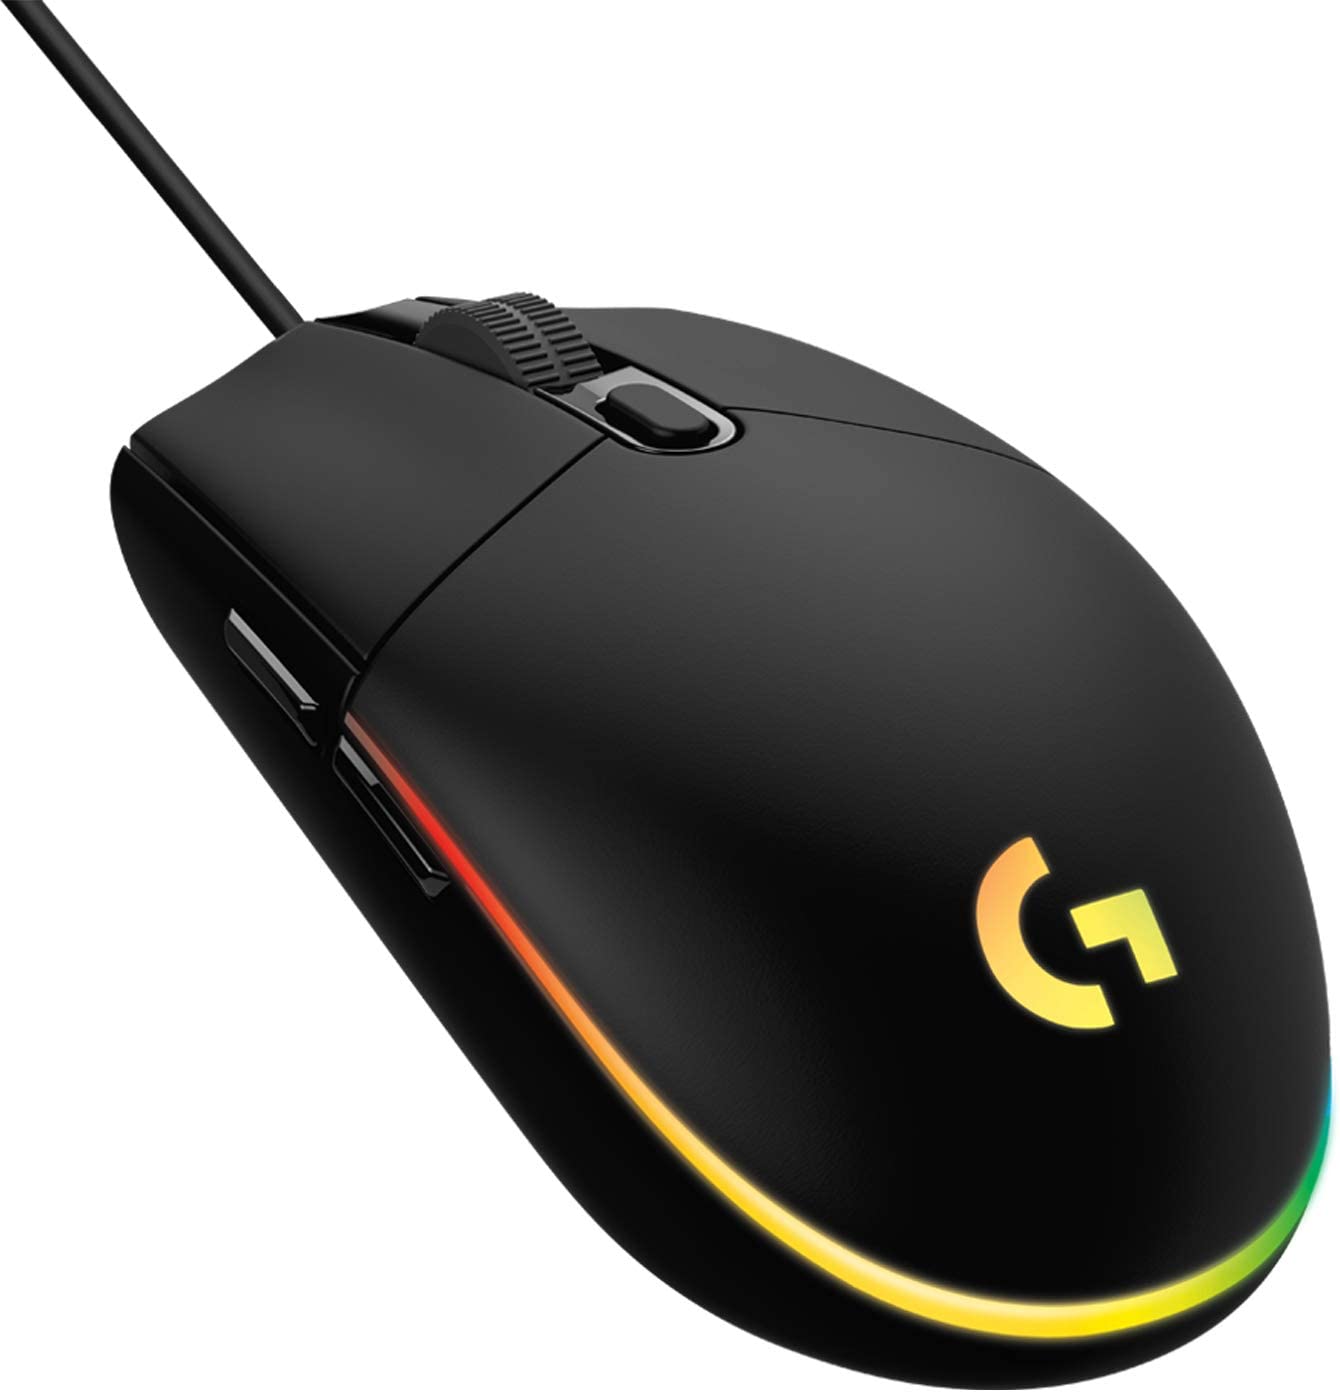 Logitech G203 Lightsync Wired Optical Gaming Mouse (Black) $19.88 + Free Shipping w/ Prime or on $25+